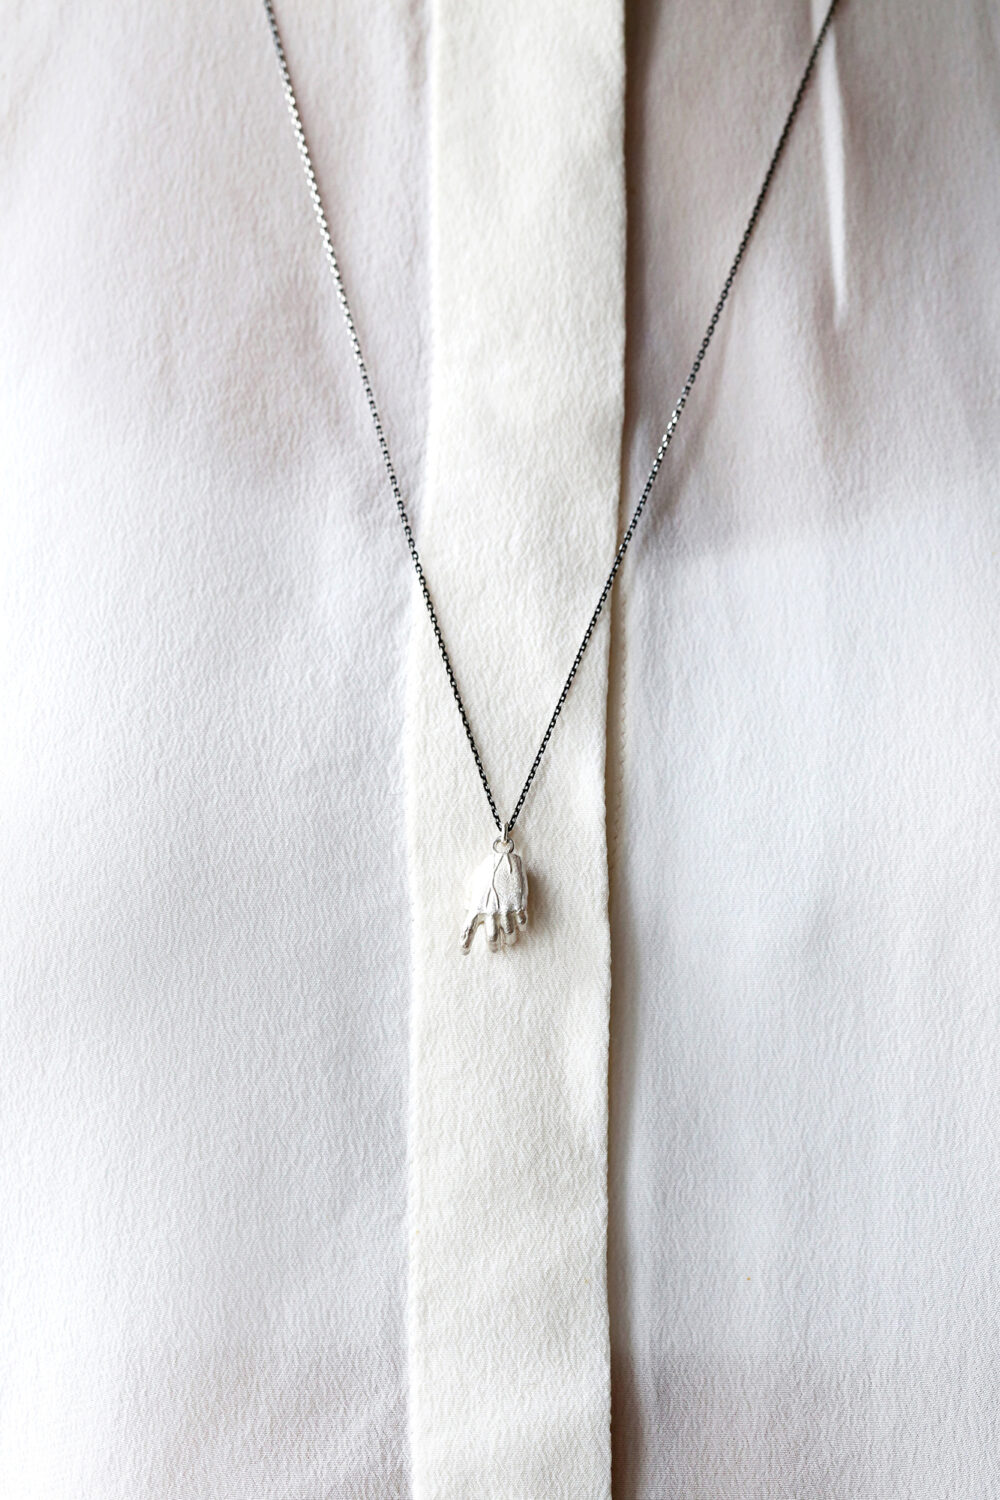 Phobia | Silver Hand Pendant All By Herself